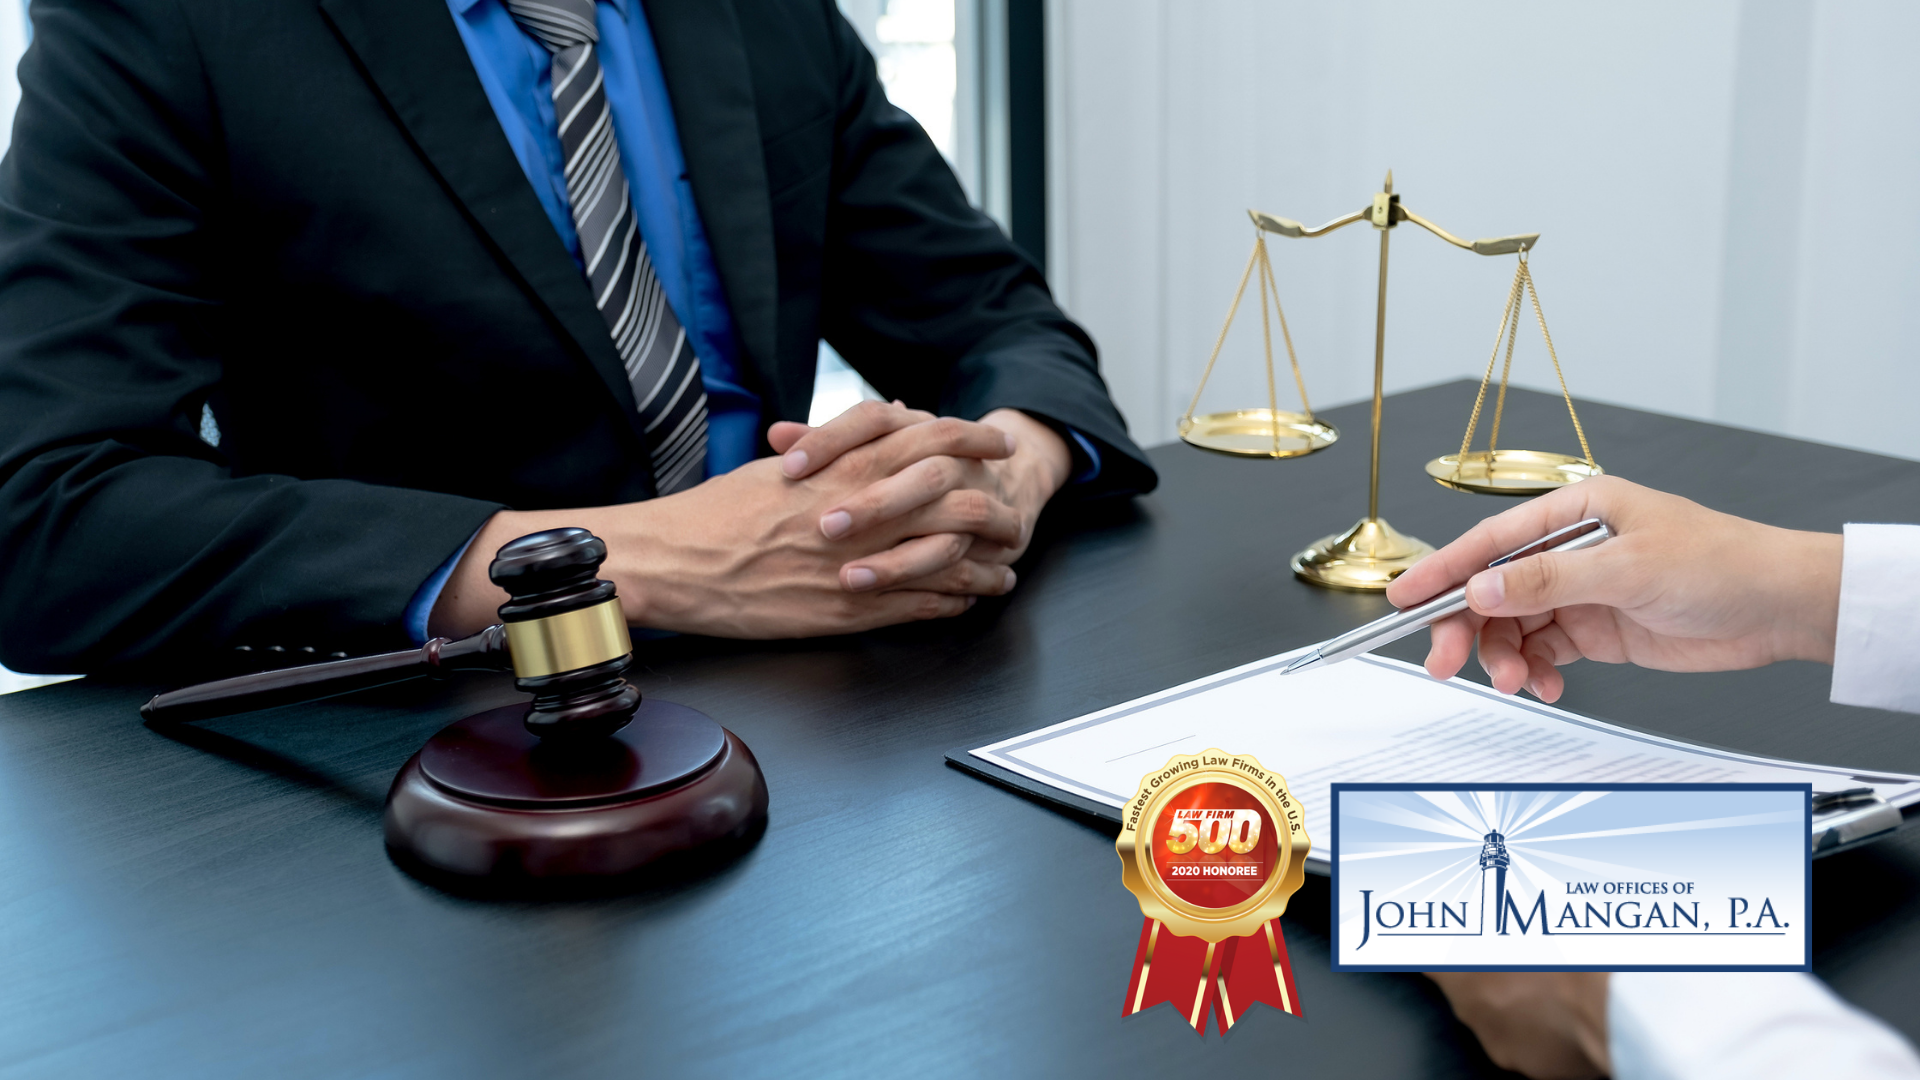 Florida Probate Small Estate vs. Large Estate settlement process is complex and requires the knowledge and experience of an estate planning probate attorney like John Mangan with offices in Stuart and Palm City, FL.